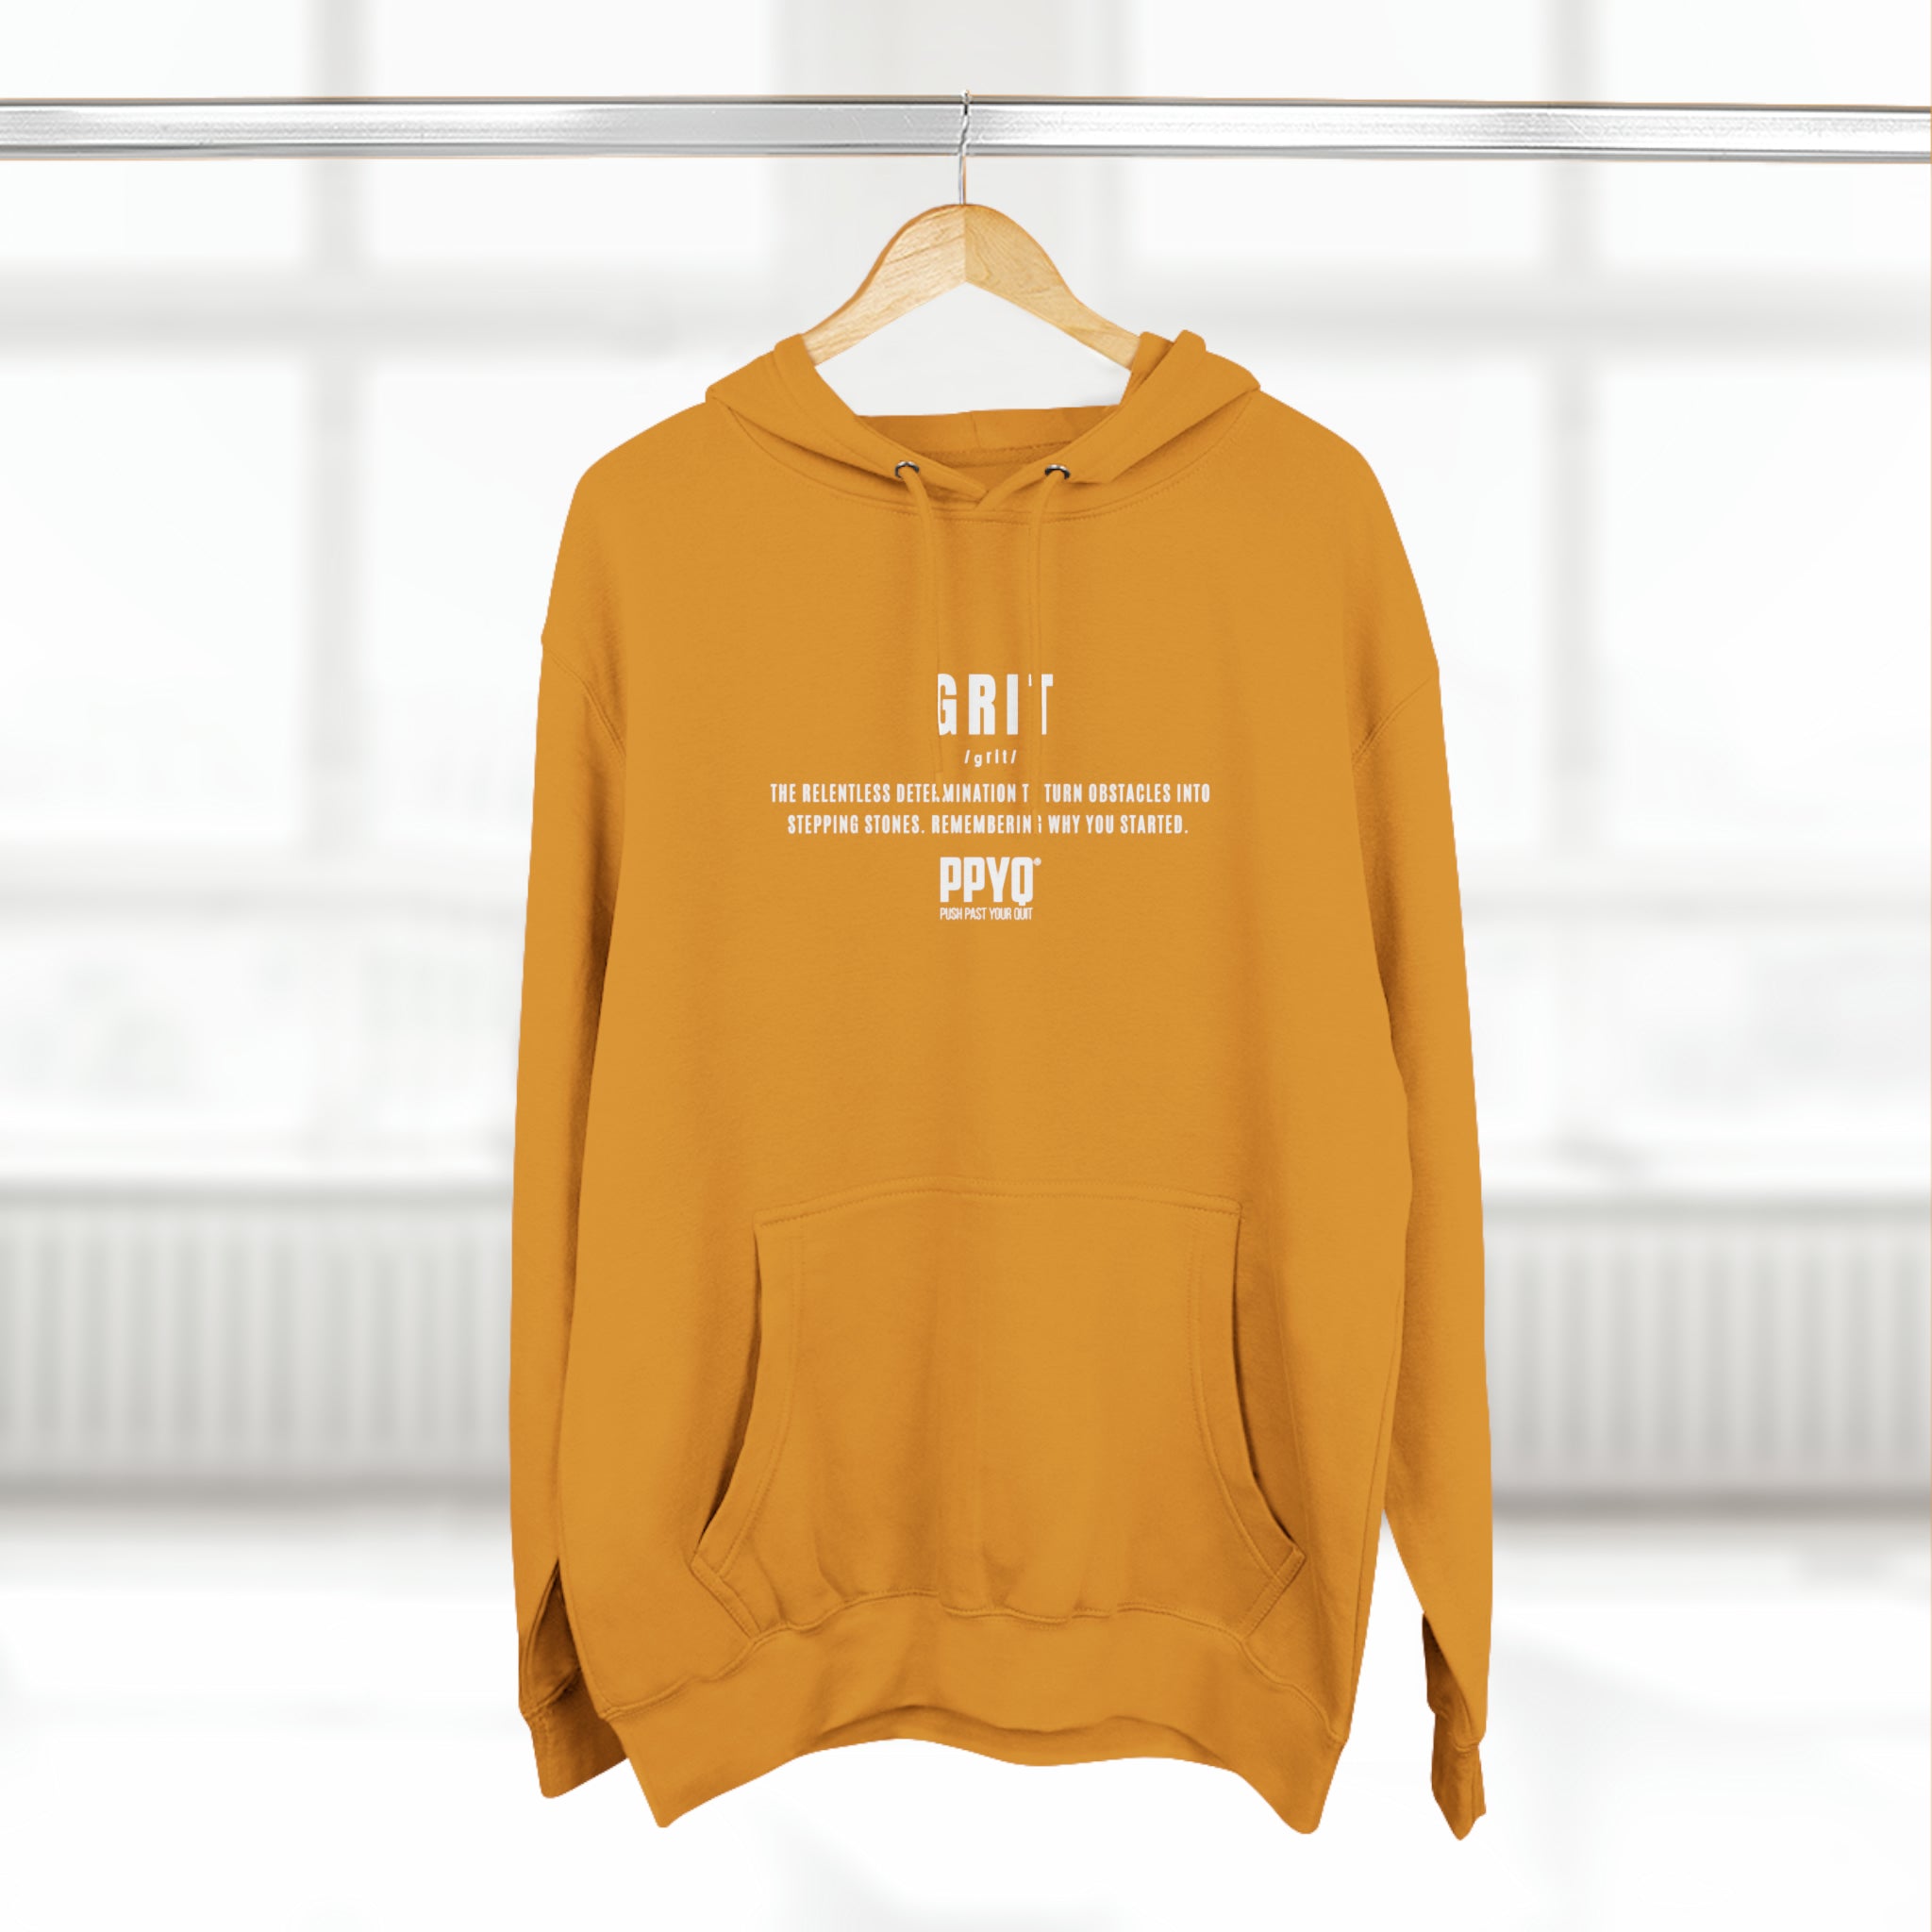 Grit PPYQ® Defined Premium Pullover Hoodie